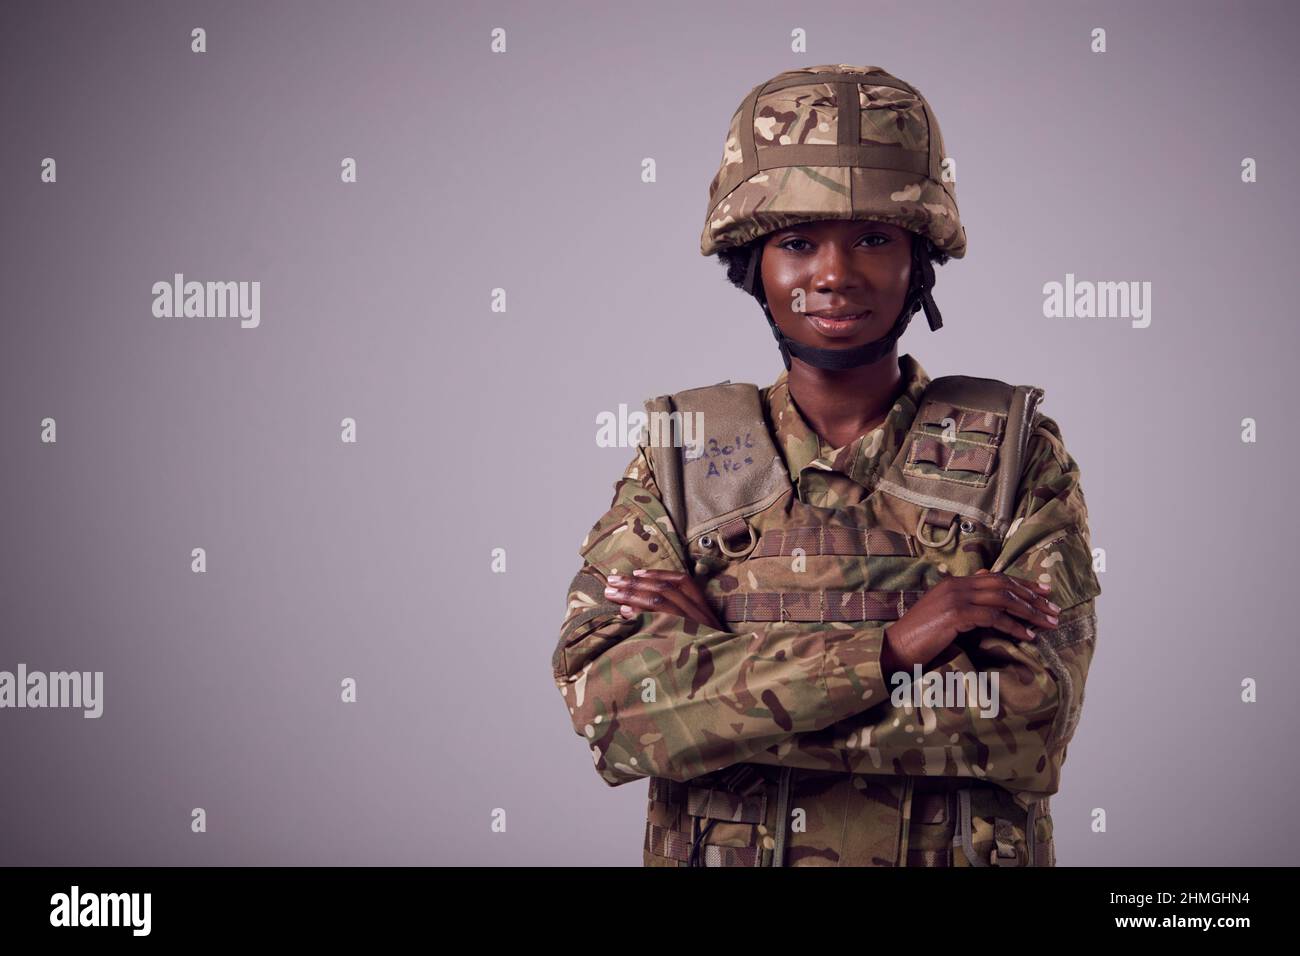 Studio Portrait Of Smiling Young Female Soldier In Military Uniform Against Plain Background Stock Photo